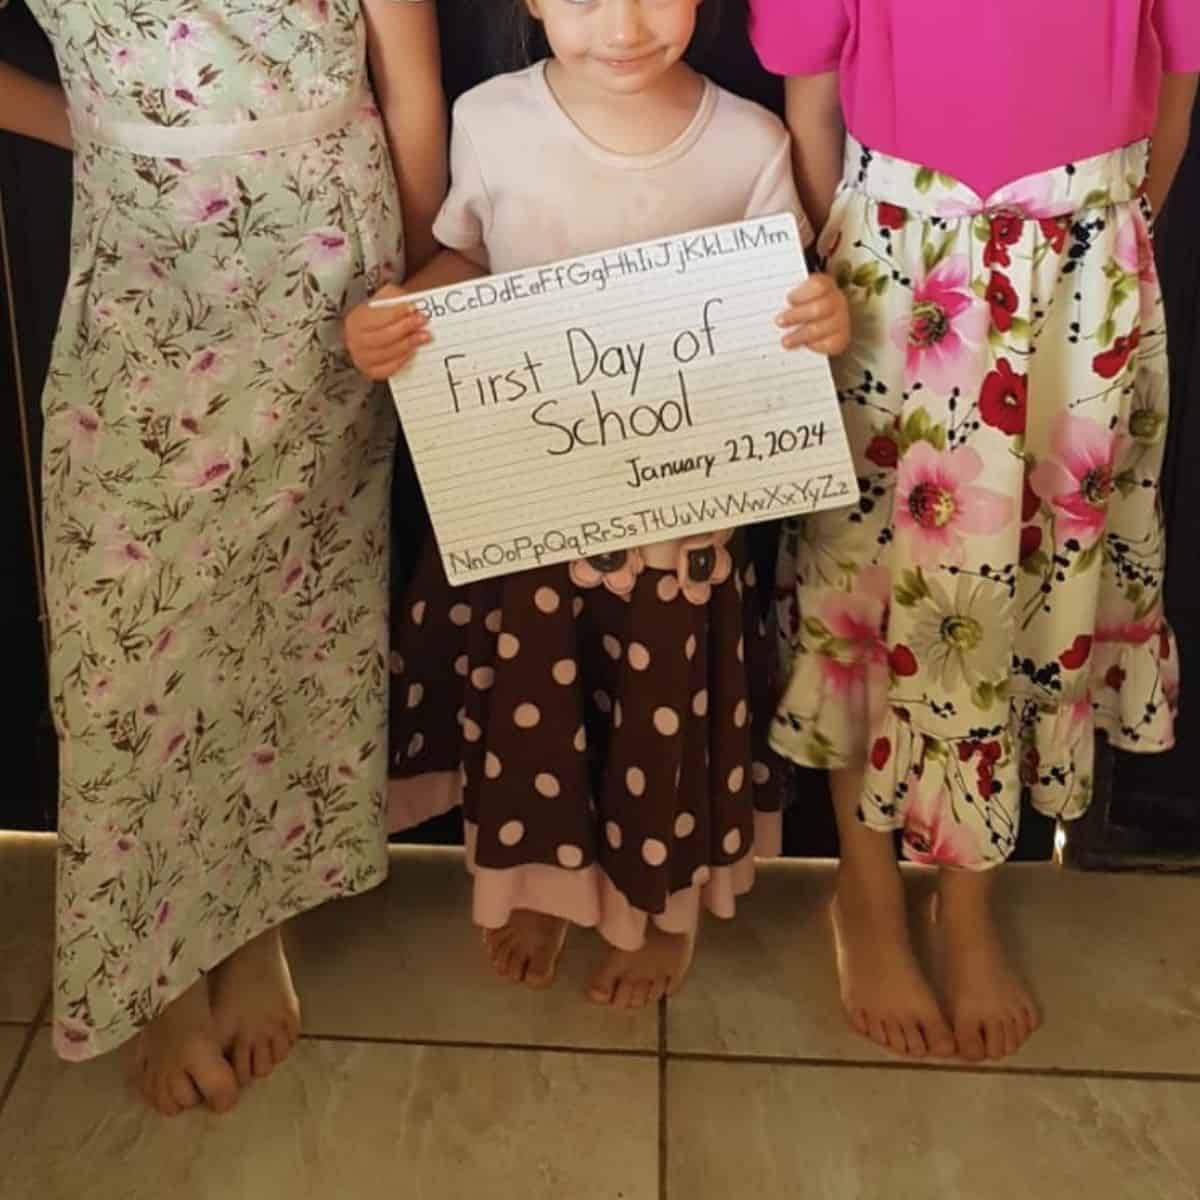 girls holding first day of school signs